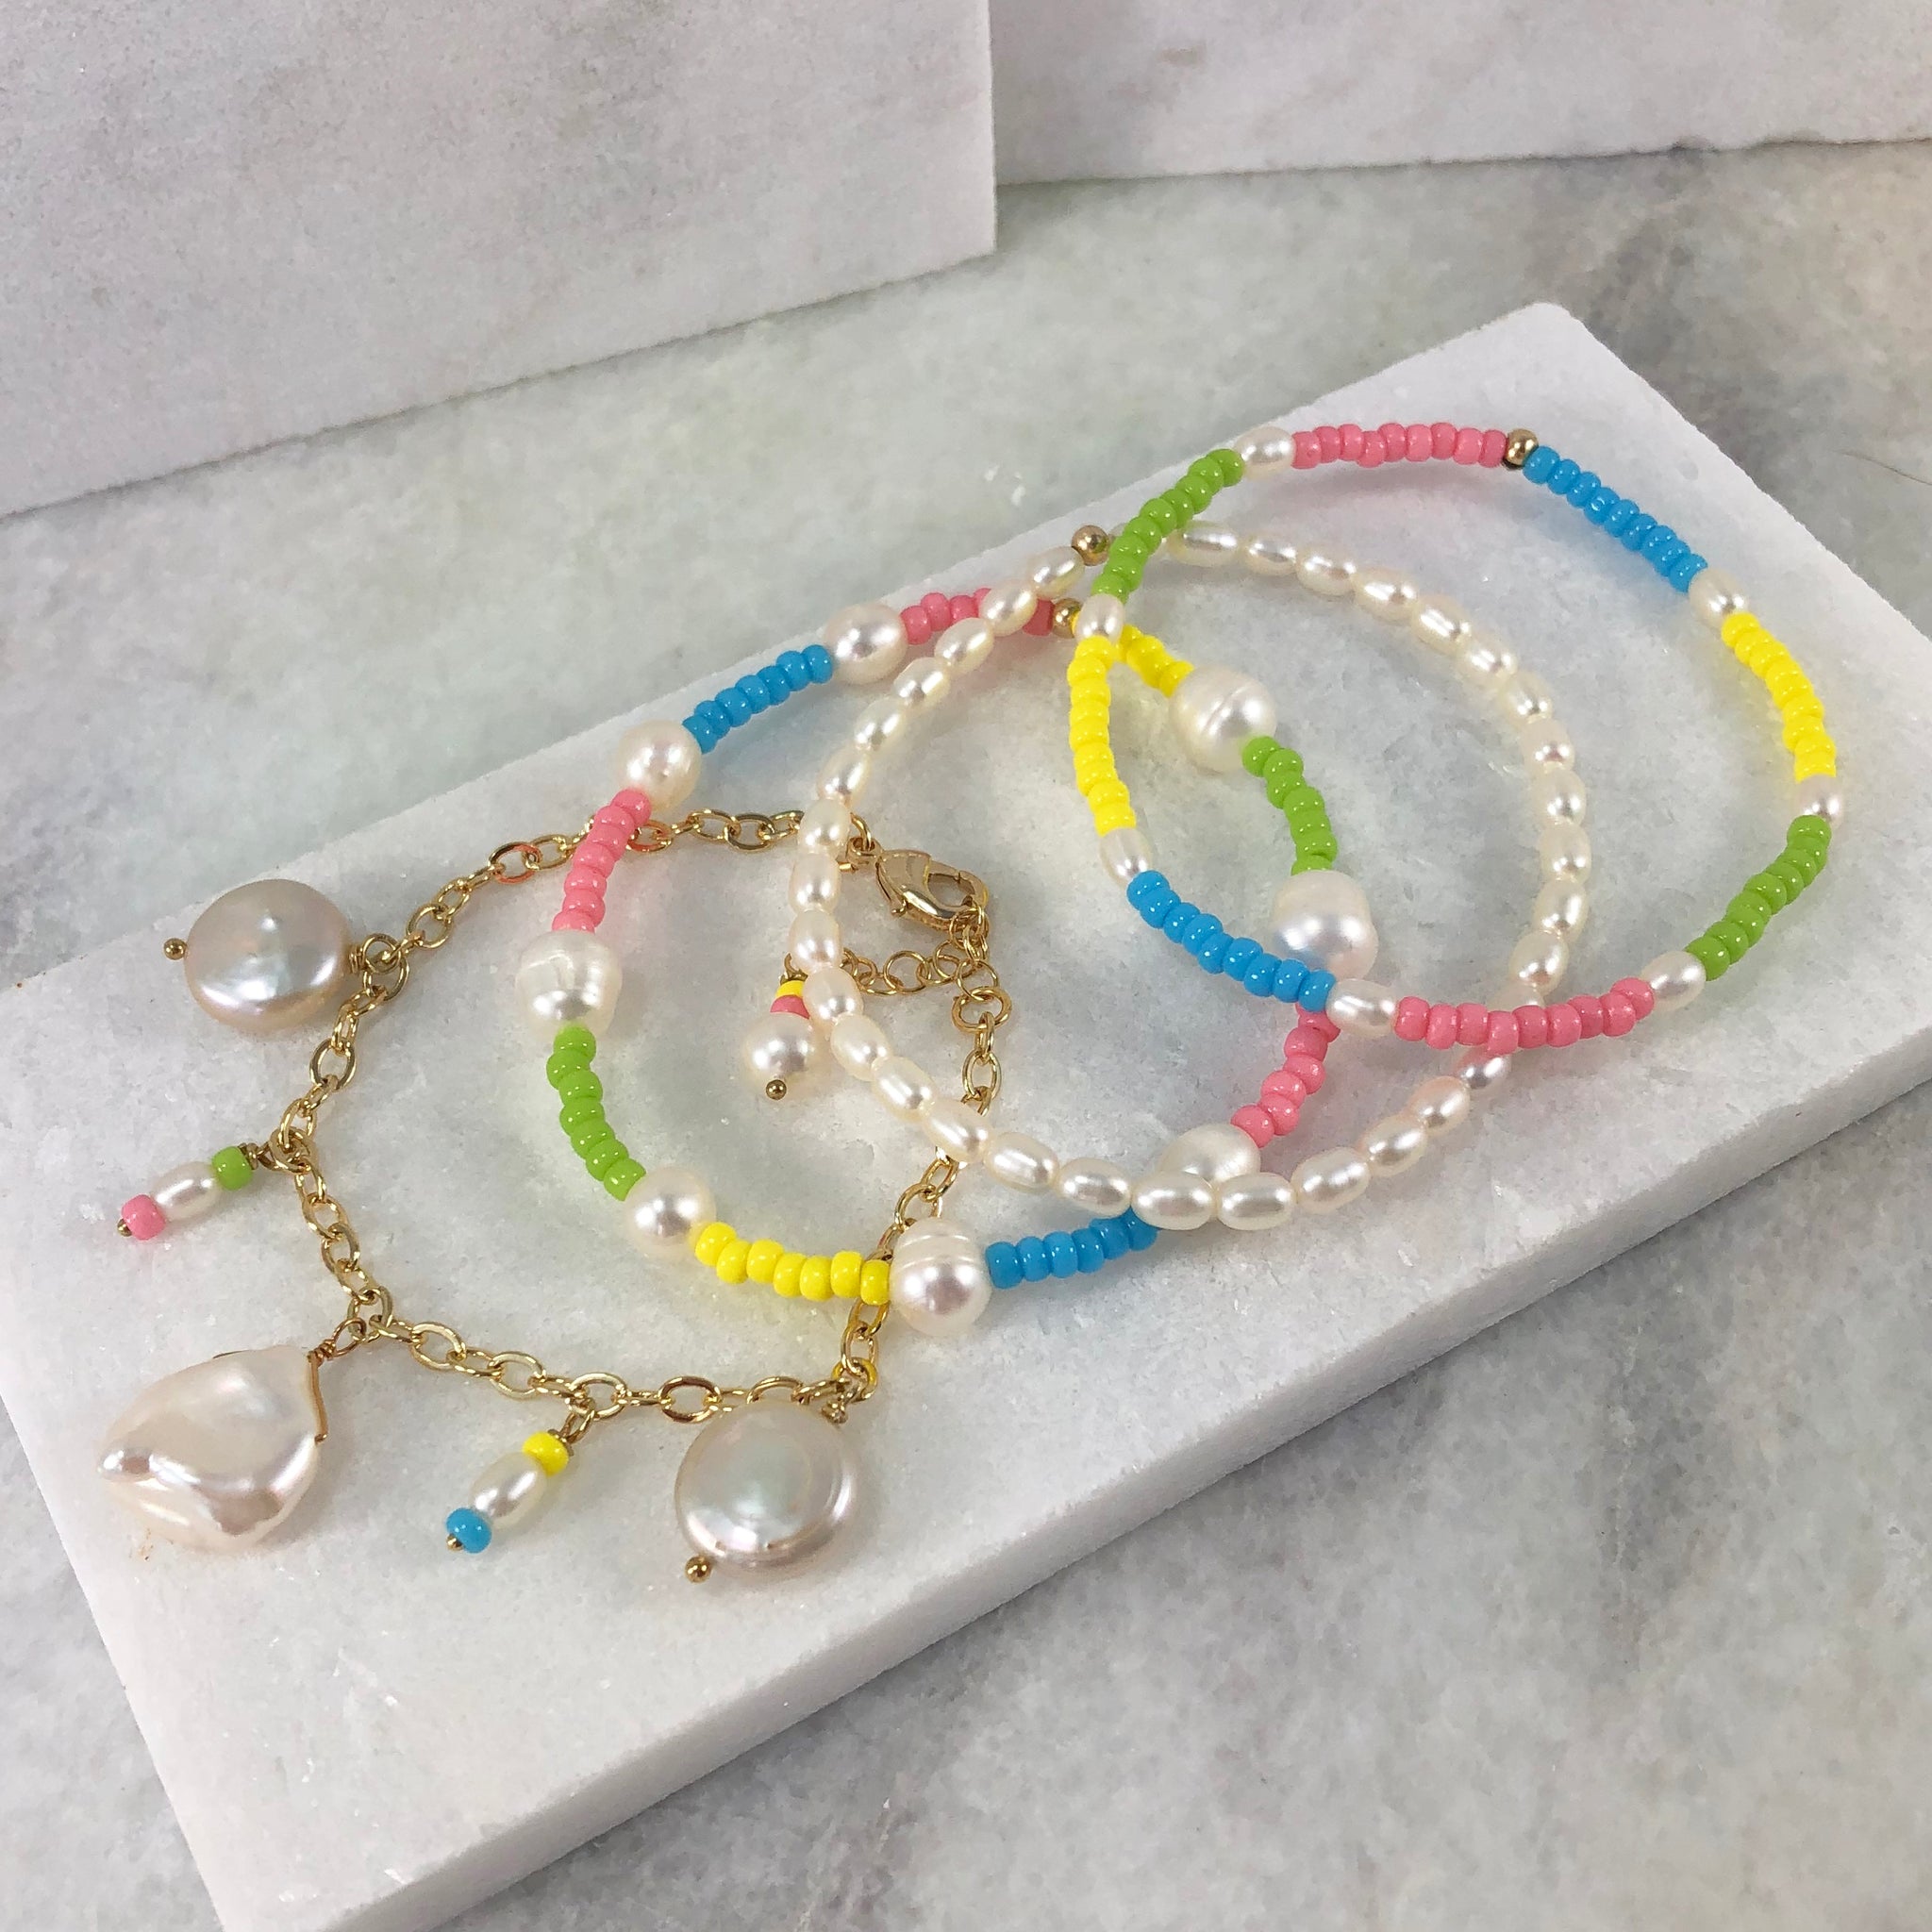 How to Make a Simple Elastic Bracelet Out of Beads and Chain